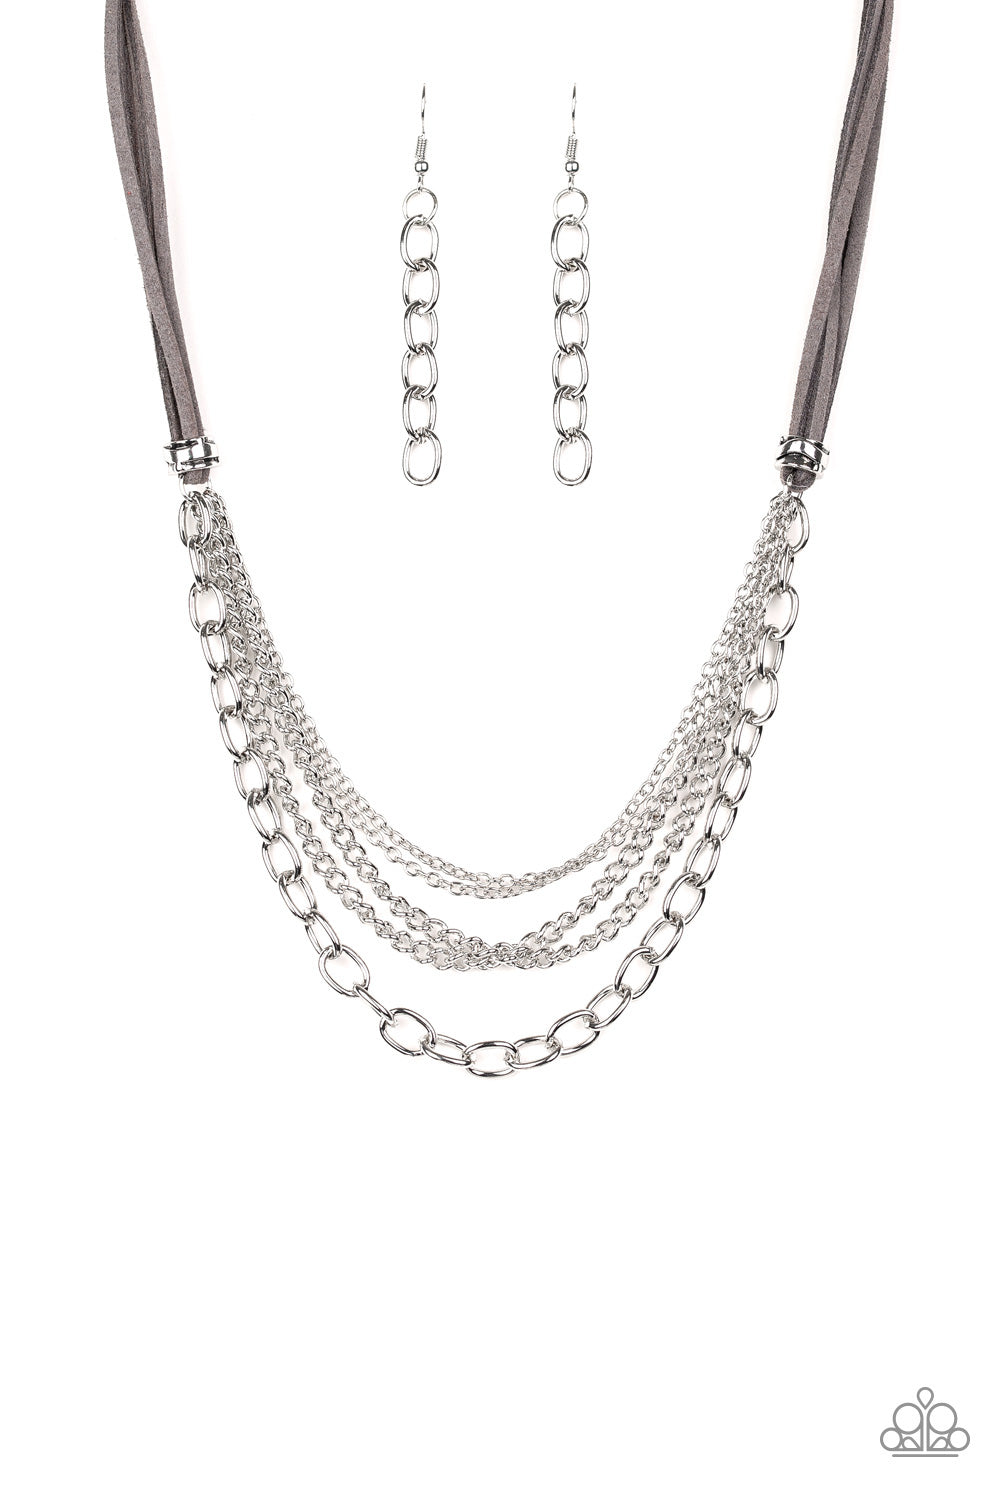 Free Roamer Silver Necklace - Paparazzi Accessories